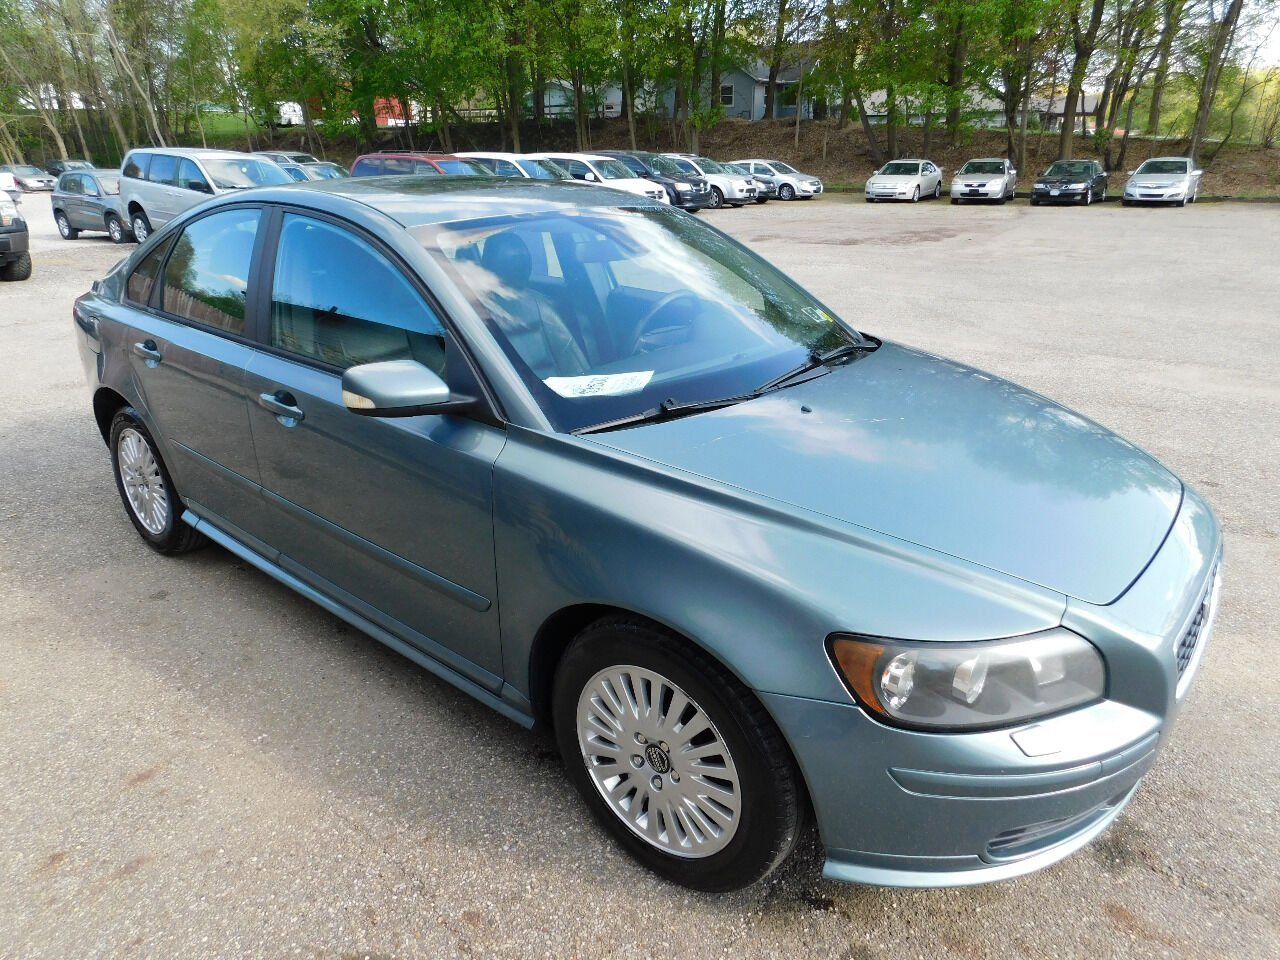 Used 2004 Volvo S40 for Sale Right Now - Autotrader